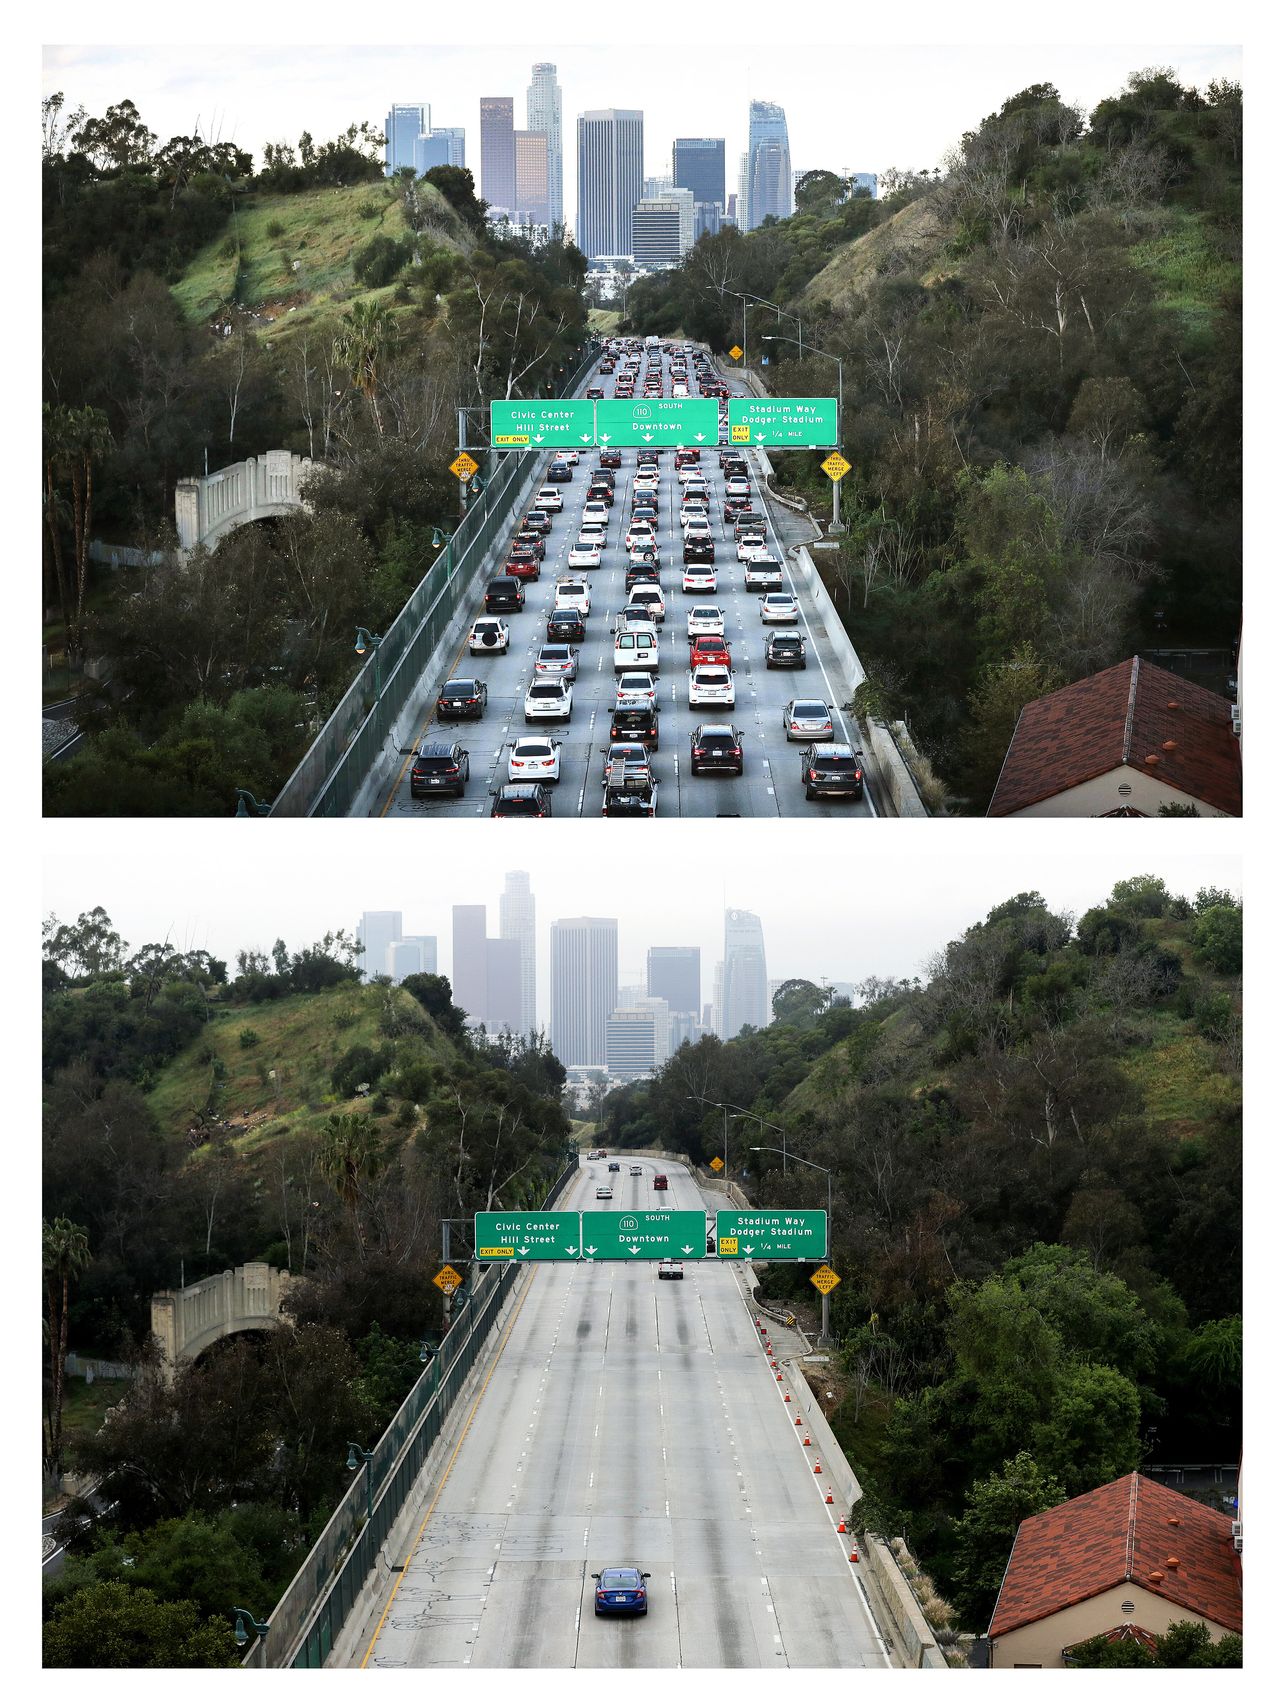 Cars heading downtown during rush hour on the 110 freeway in Los Angeles before stay-at-home orders were issued on March 12, 2020. The bottom image was taken on April 17, at the same time of day.